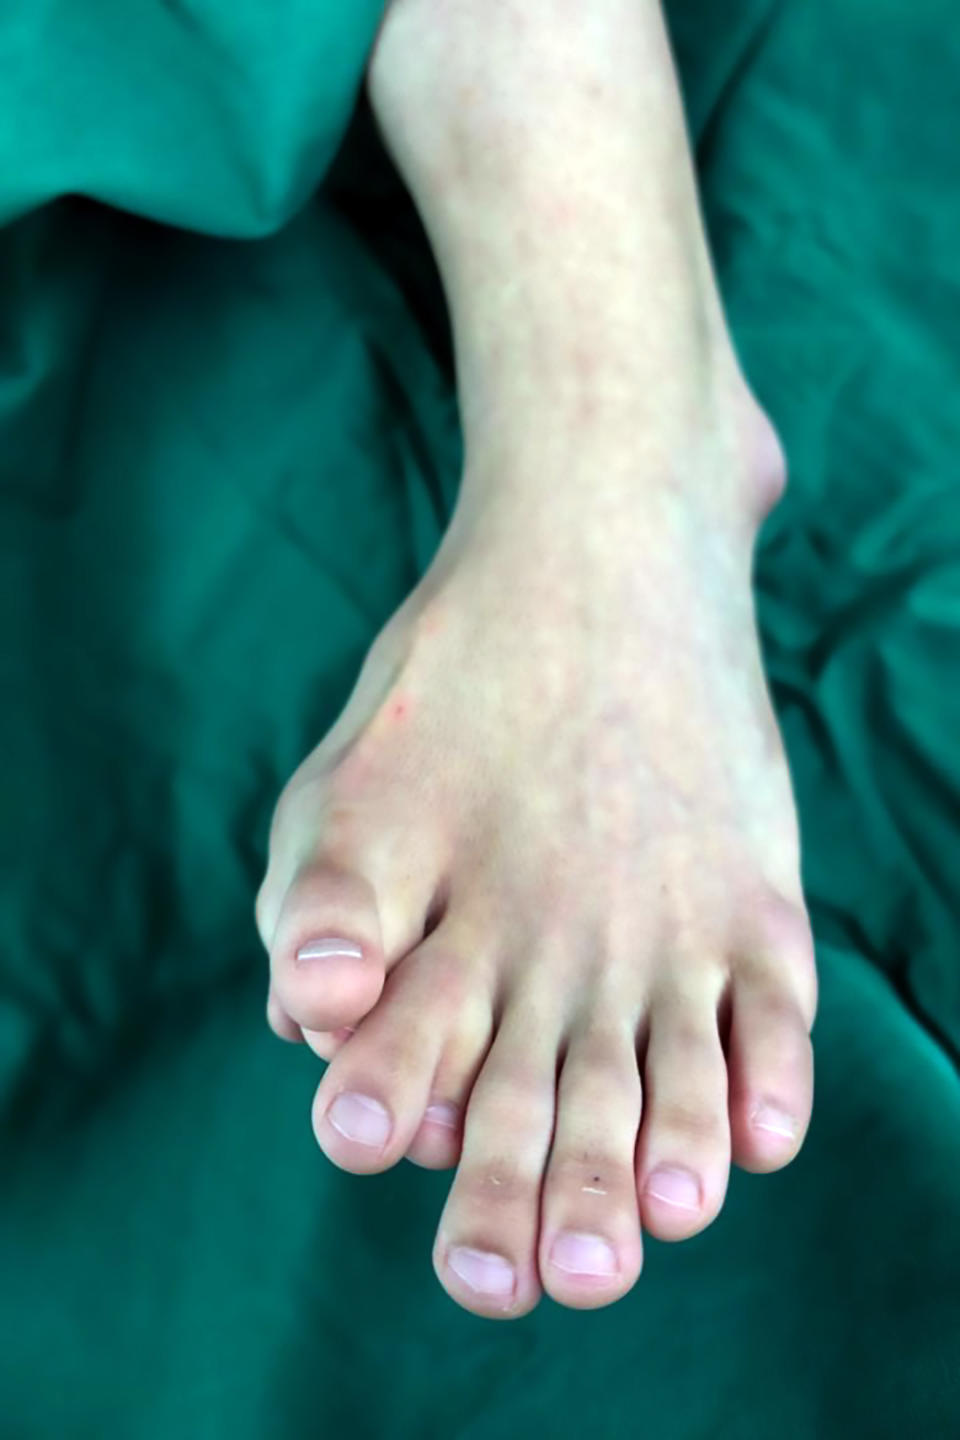 Pictured is Ajun's left foot, which has four extra toes. Source: Australscope.